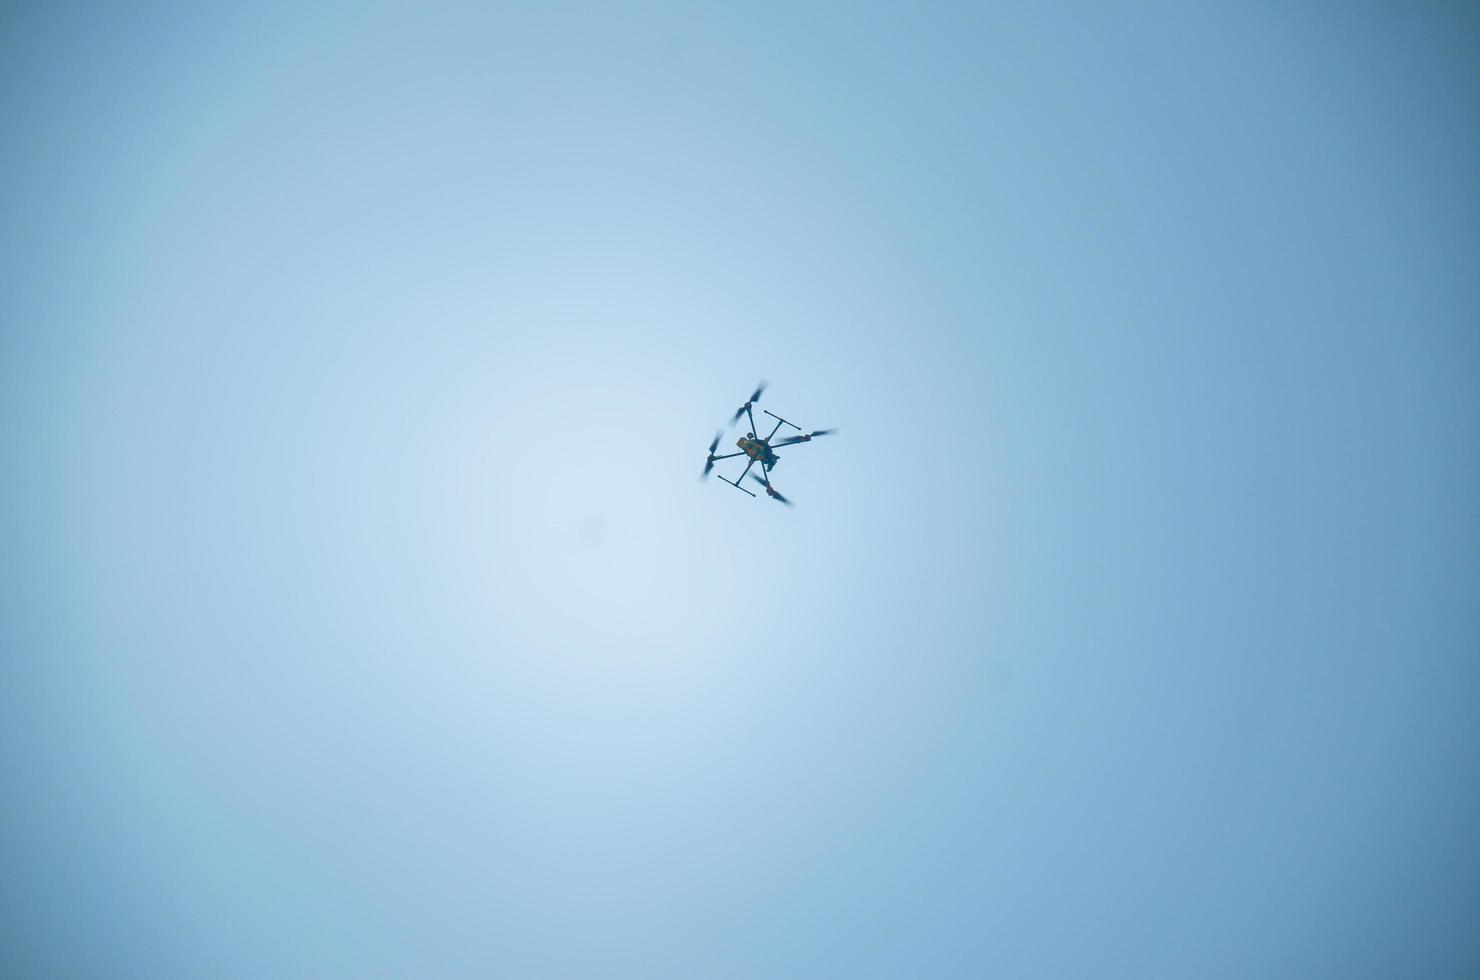 A flying drone in the blue sky photo